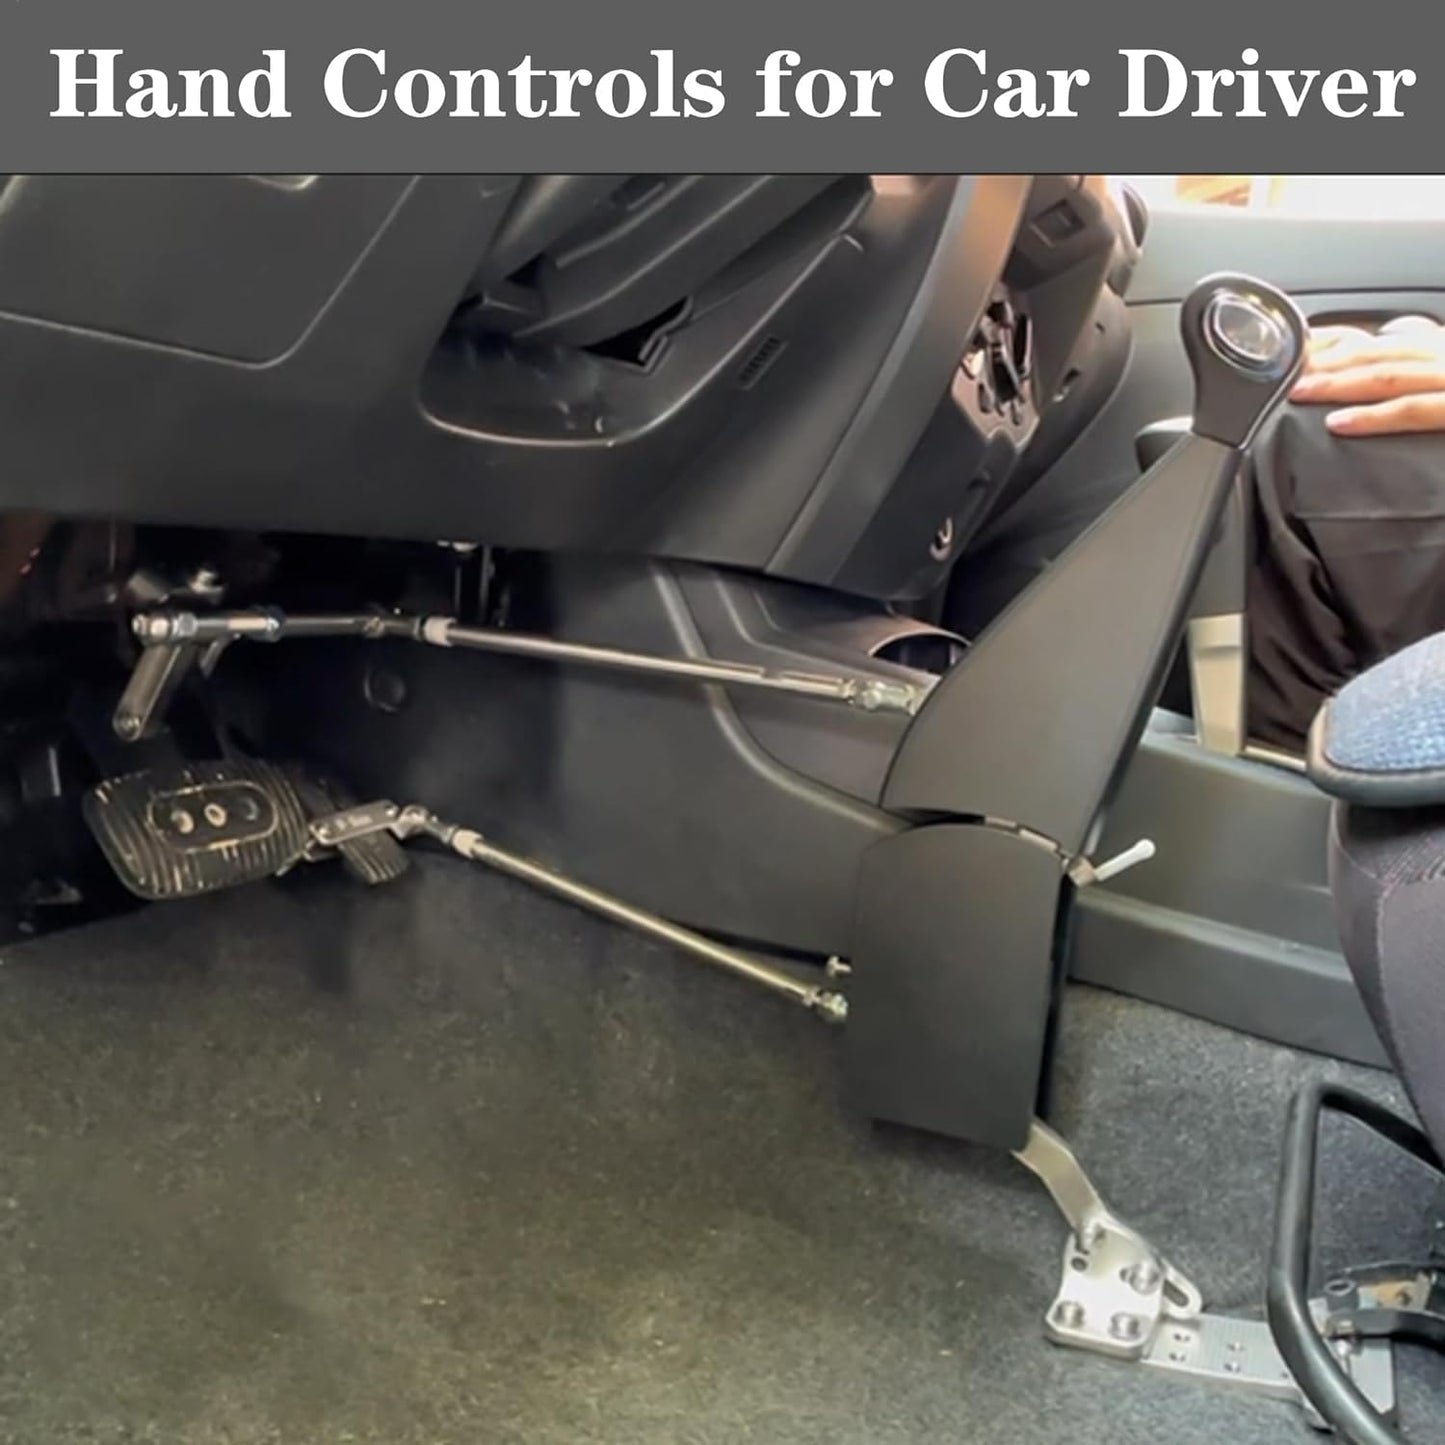 Loveso Universal Hand Controls for Disabled Drivers Handicap Driver Hand Controls Disabled Driving Hand Controls Aid Equipment/Brake Pedals Assist High-end Device Kit